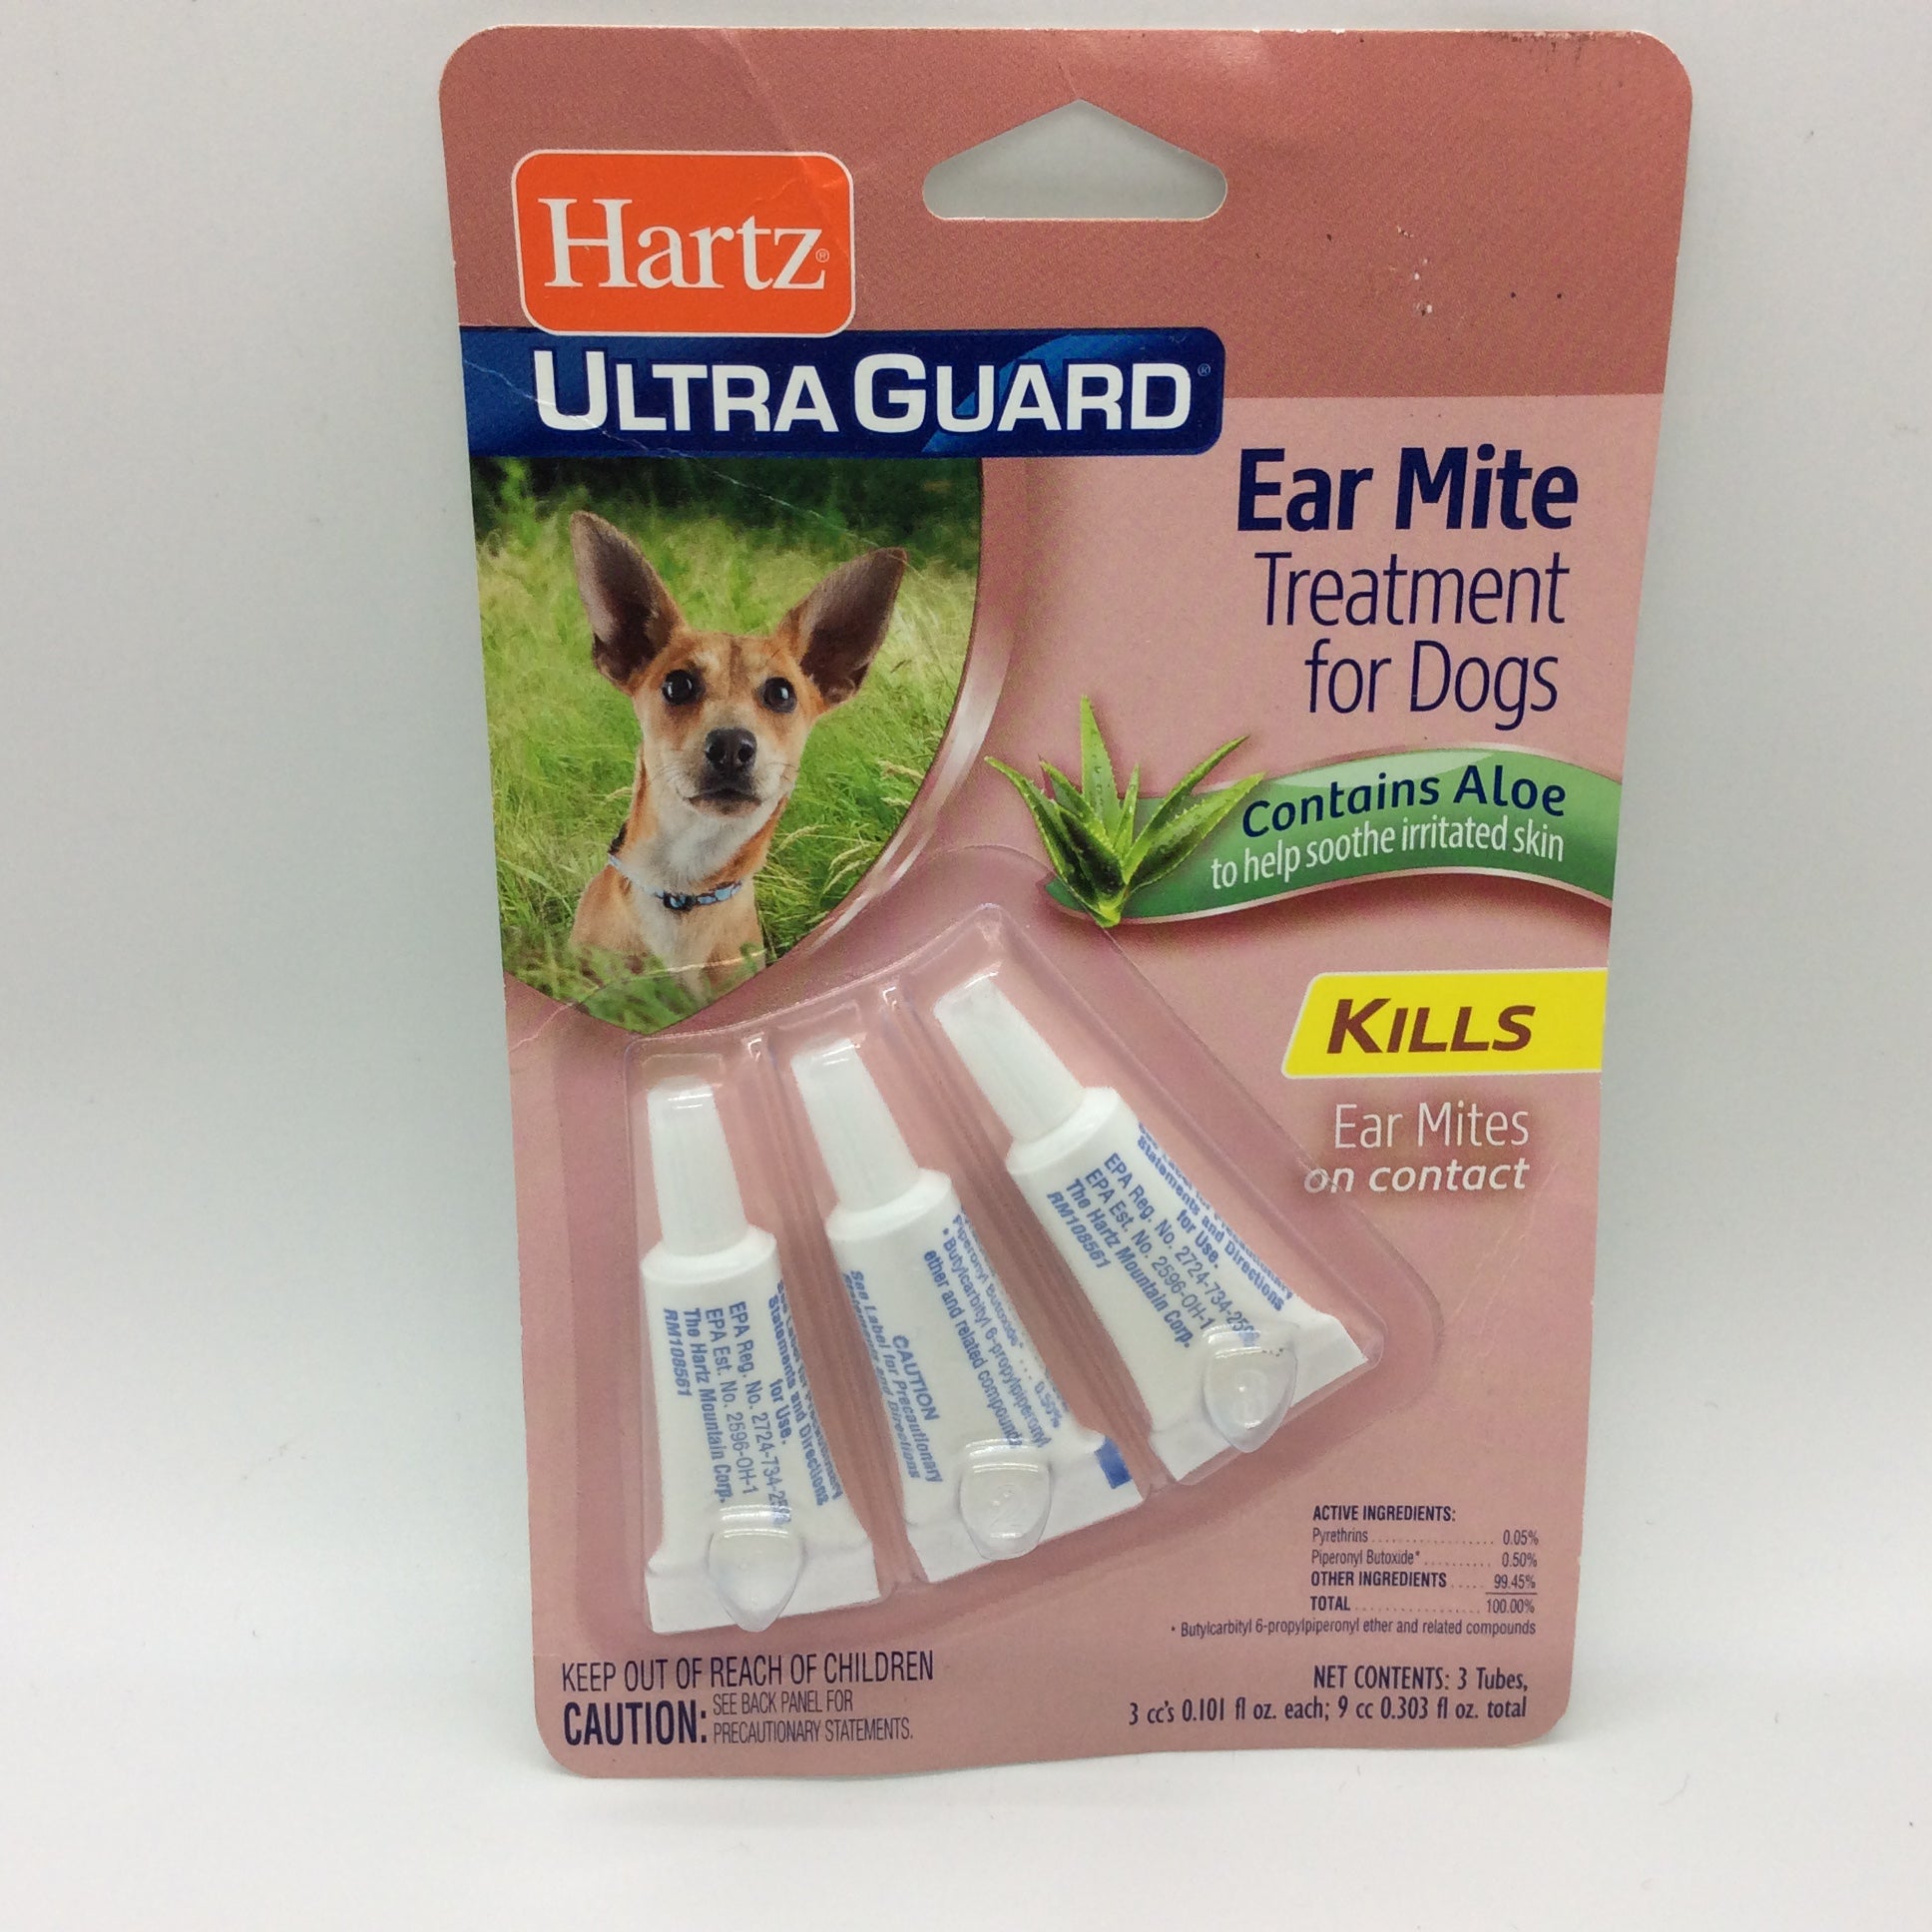 a package of ear mitts for dogs